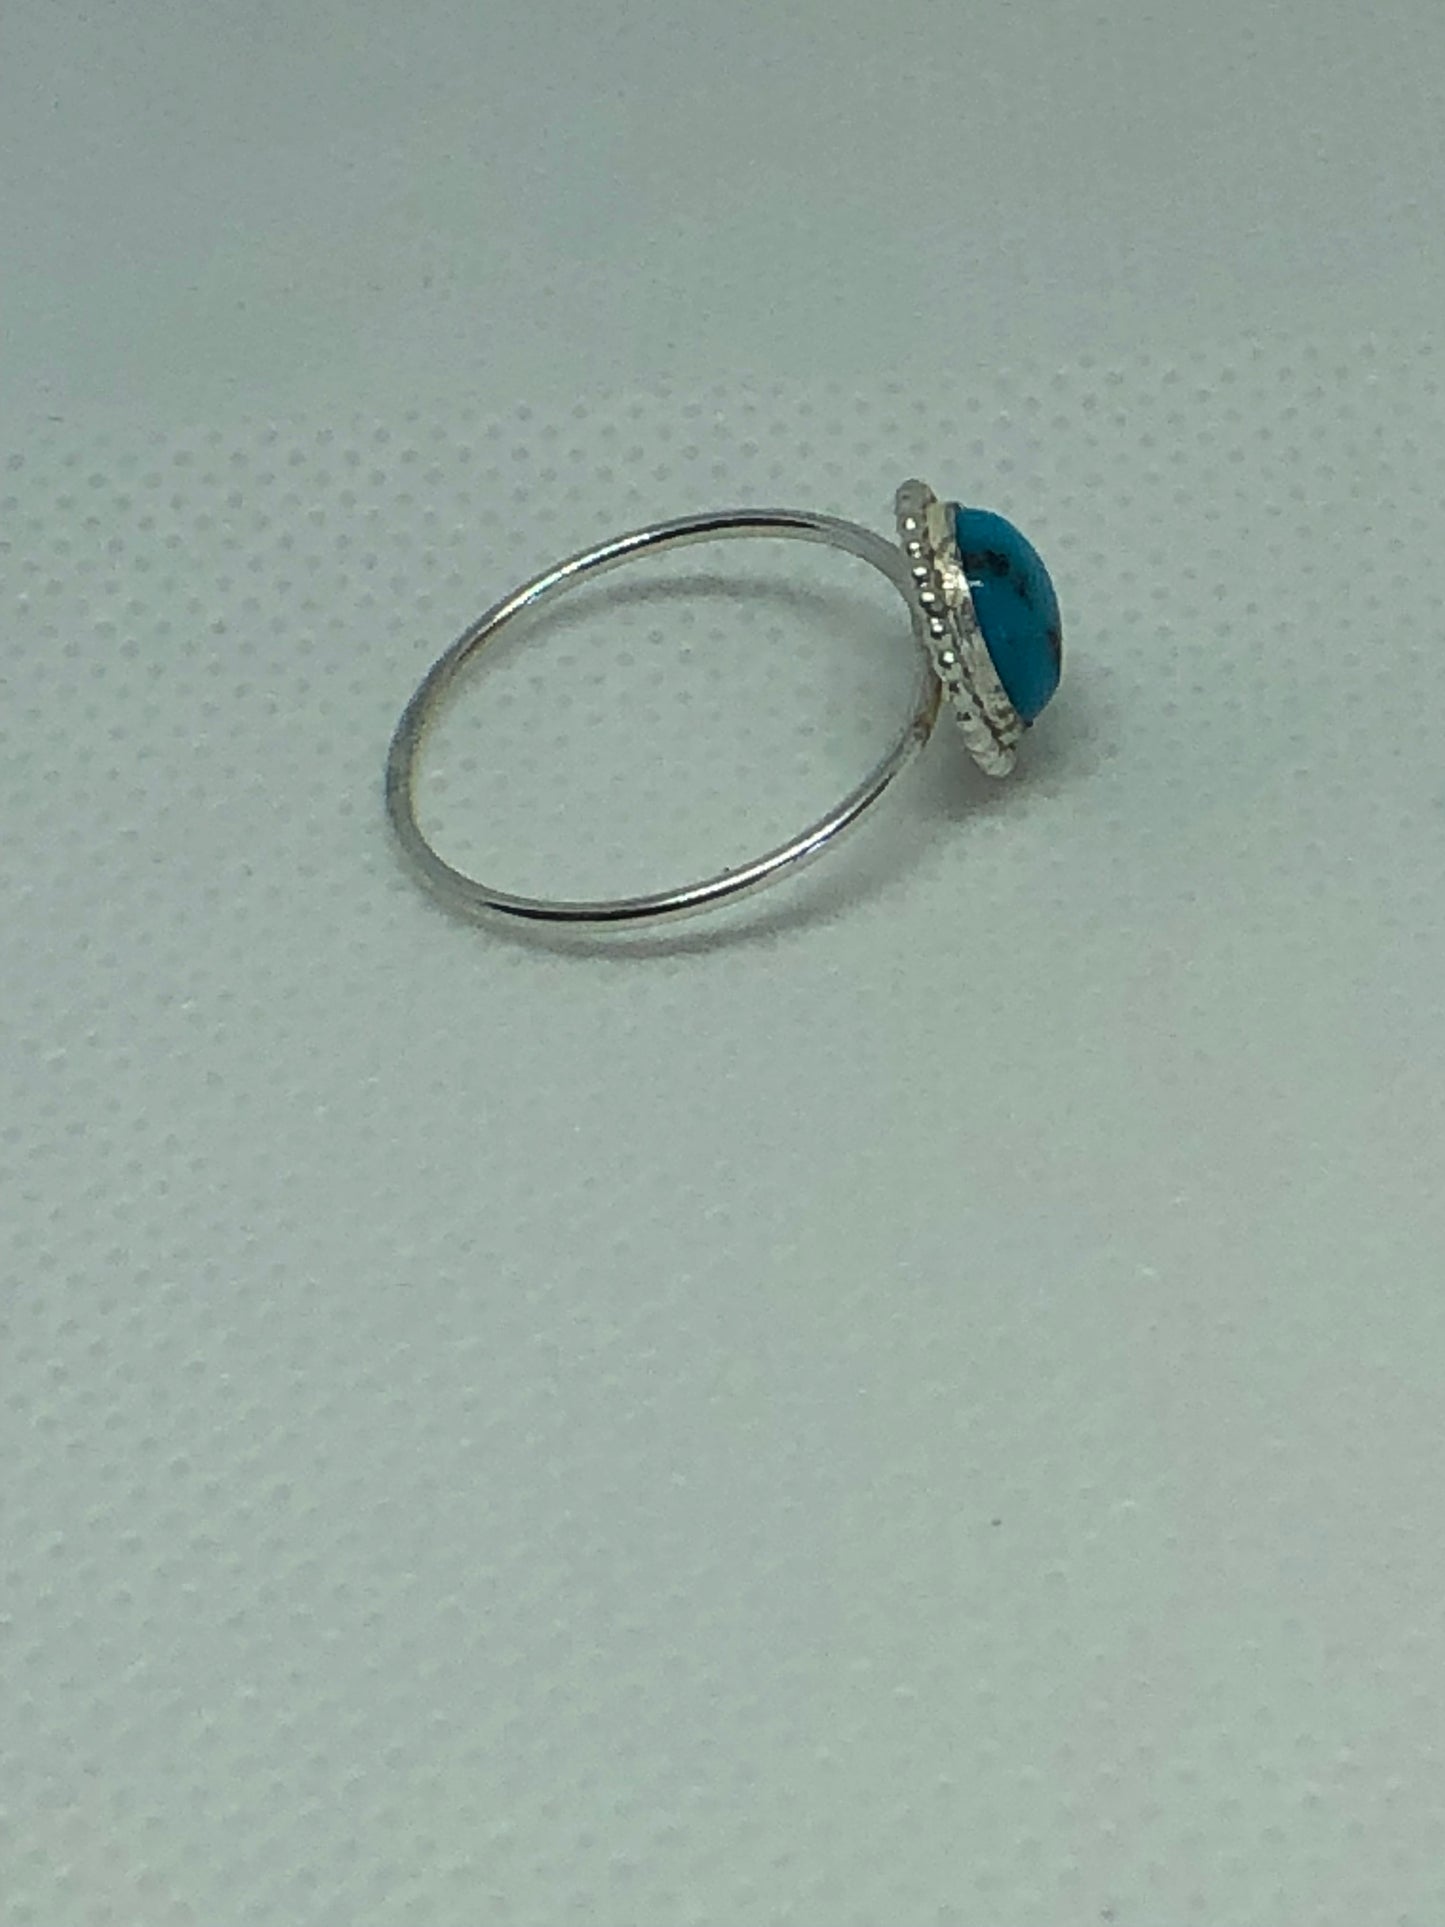 7 & 8 US 8mm Turquoise Sterling Silver Ring